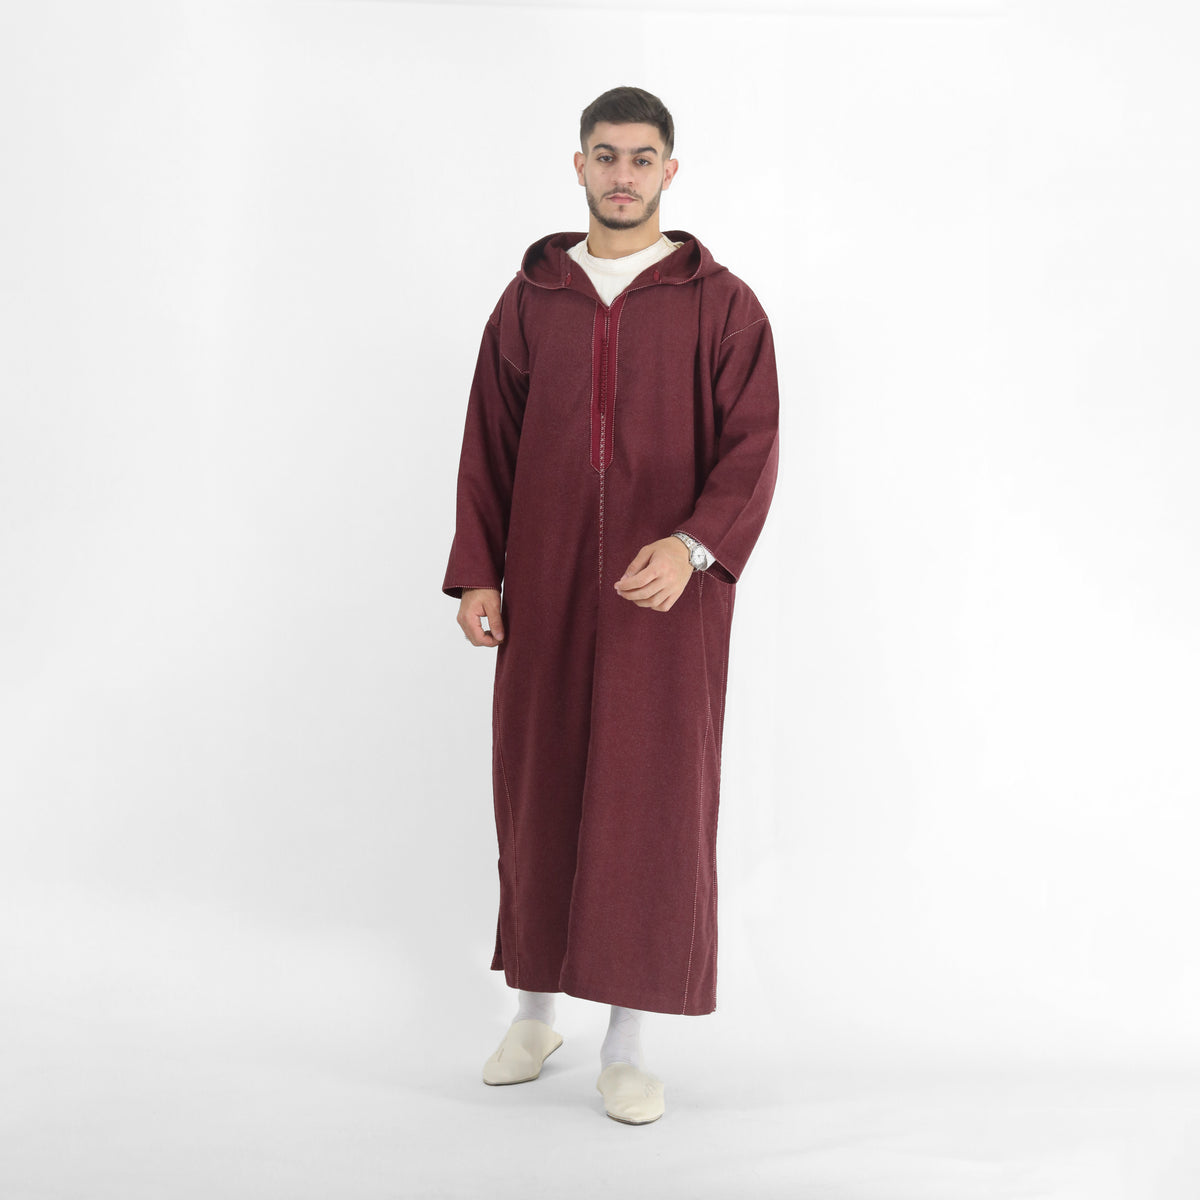 Golden Drapes Embroidered Full-sleeve Long Djellaba Thobes